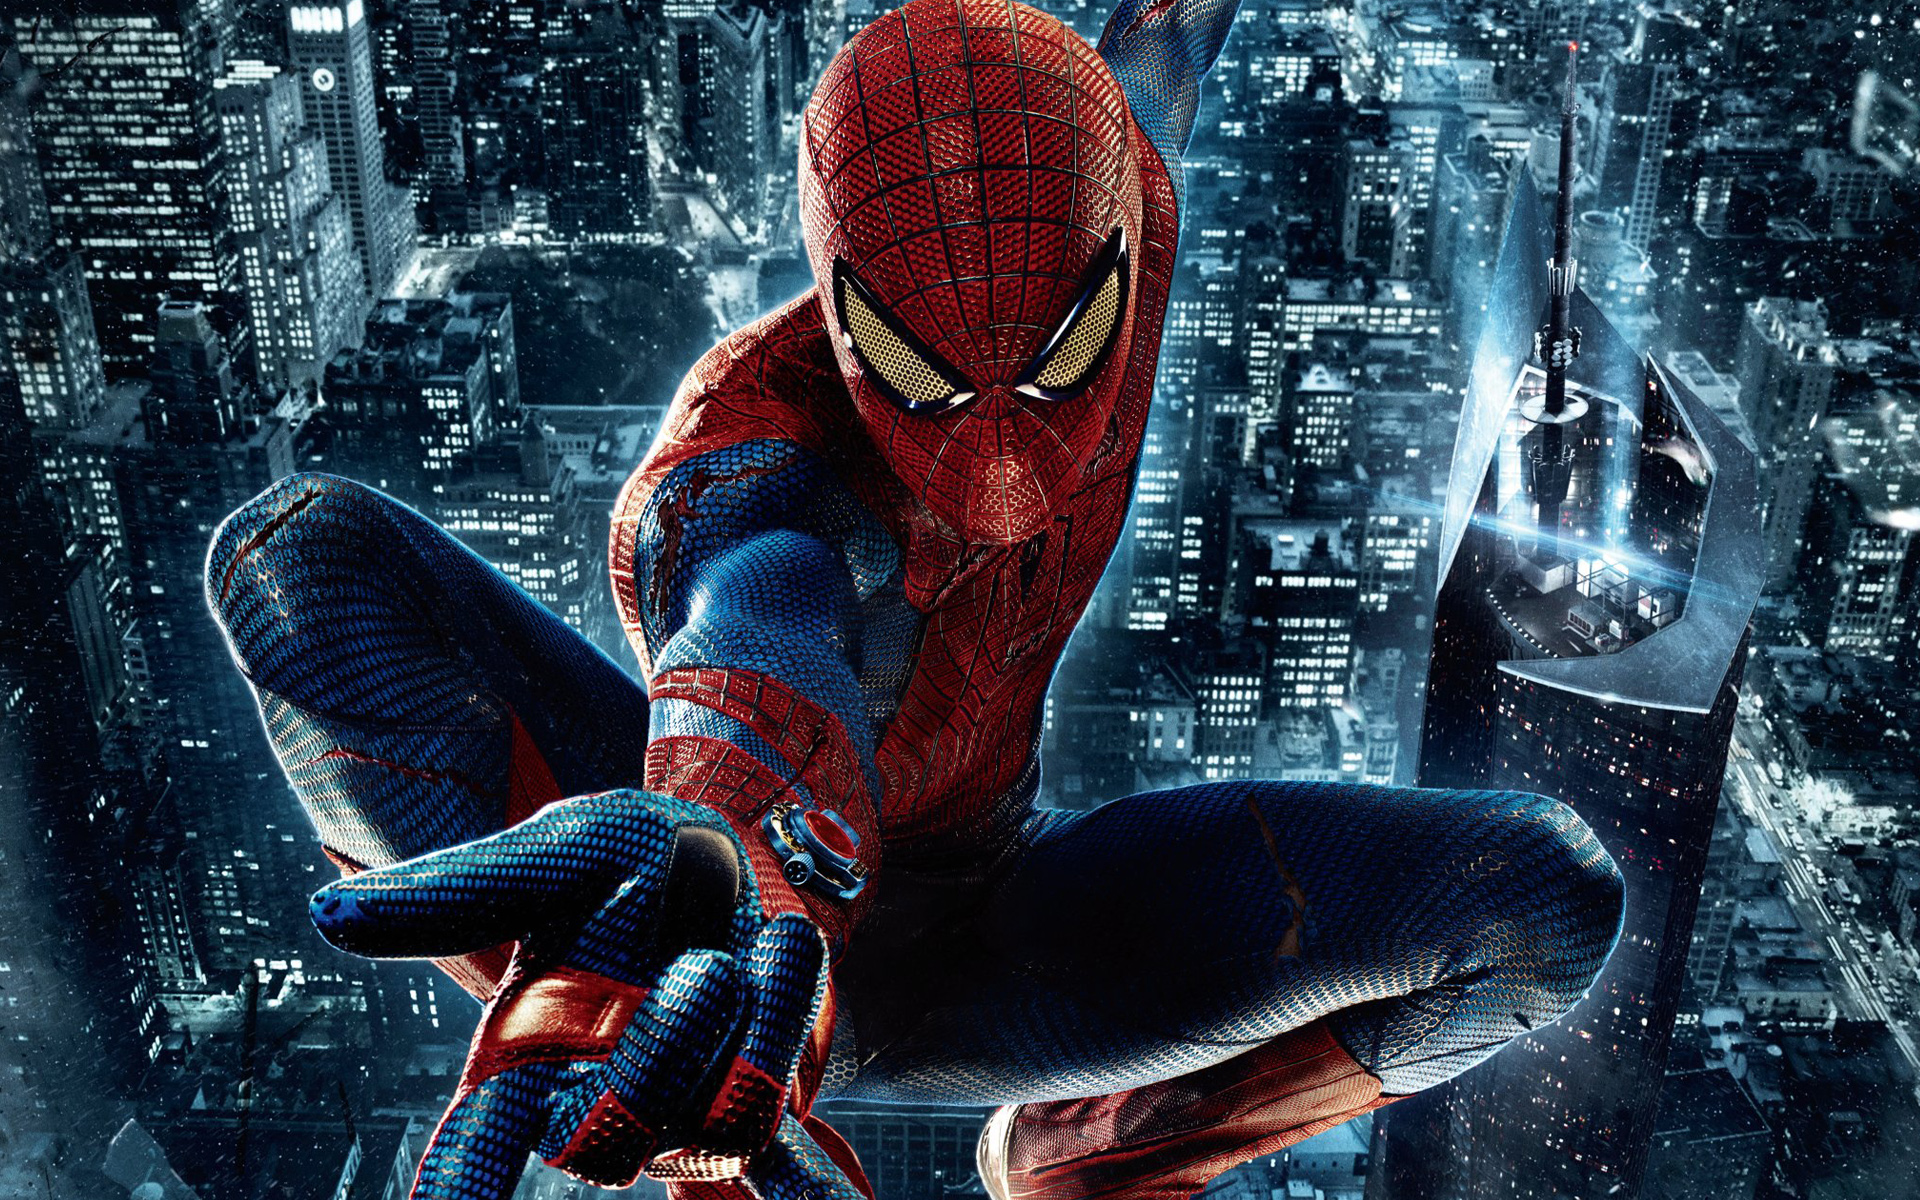 Movie News: Sony announces release dates for The Amazing Spider-Man 3 and 4